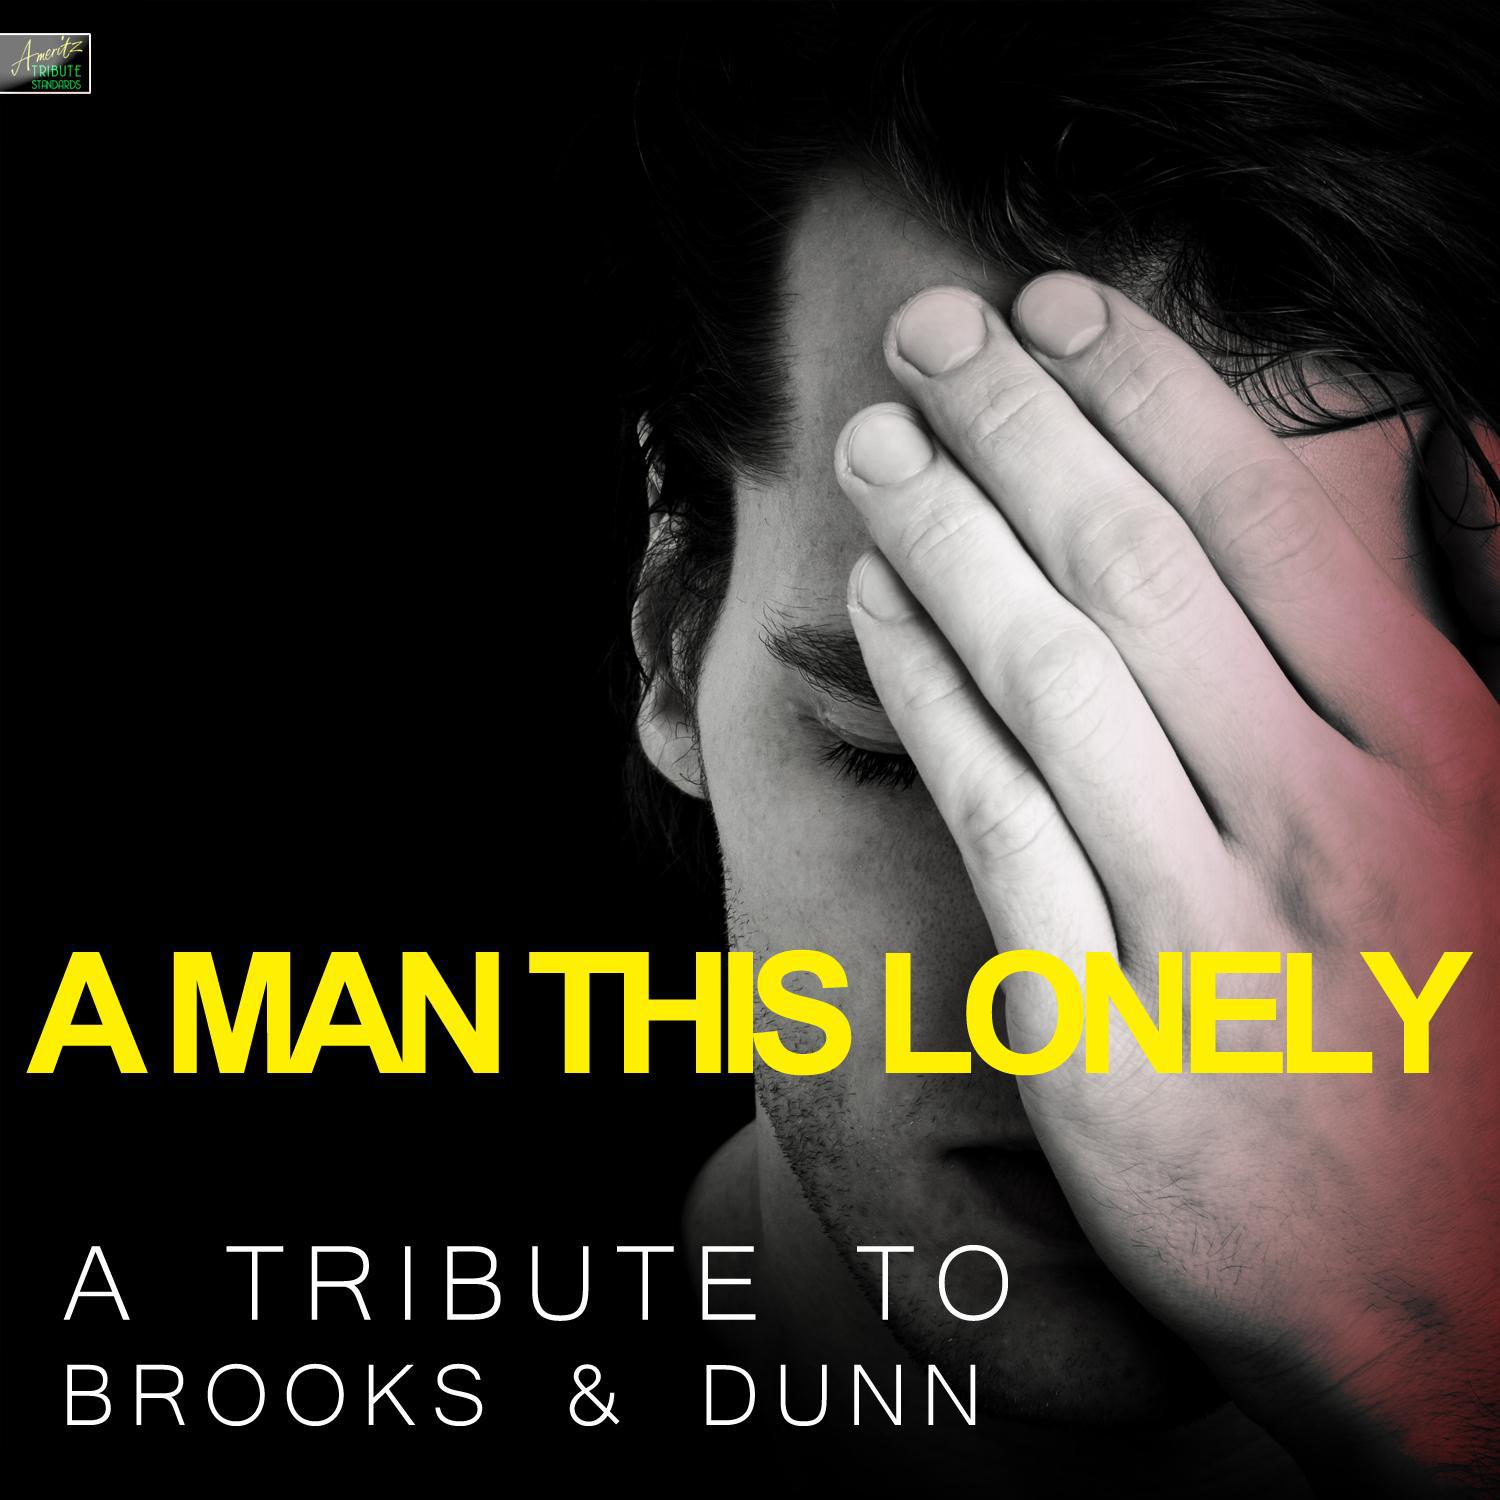 A Man This Lonely - A Tribute to Brooks & Dunn